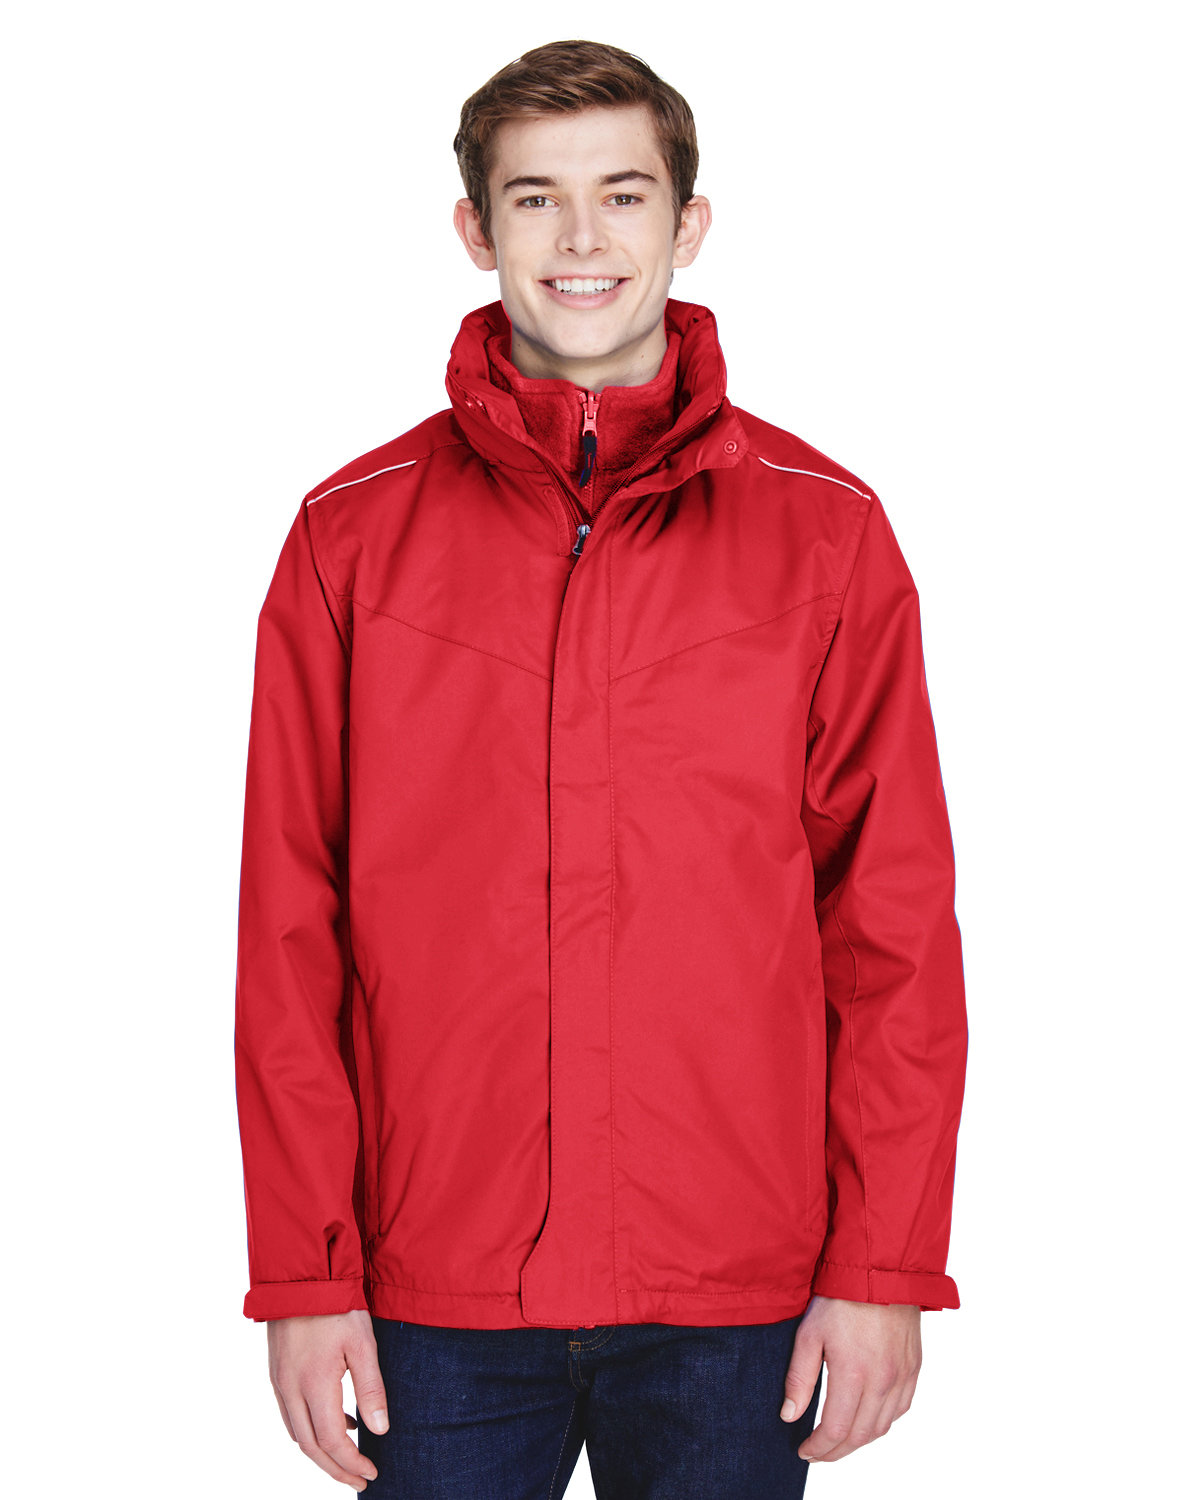 Port Authority Tour Jacket 90836 - from $7.34